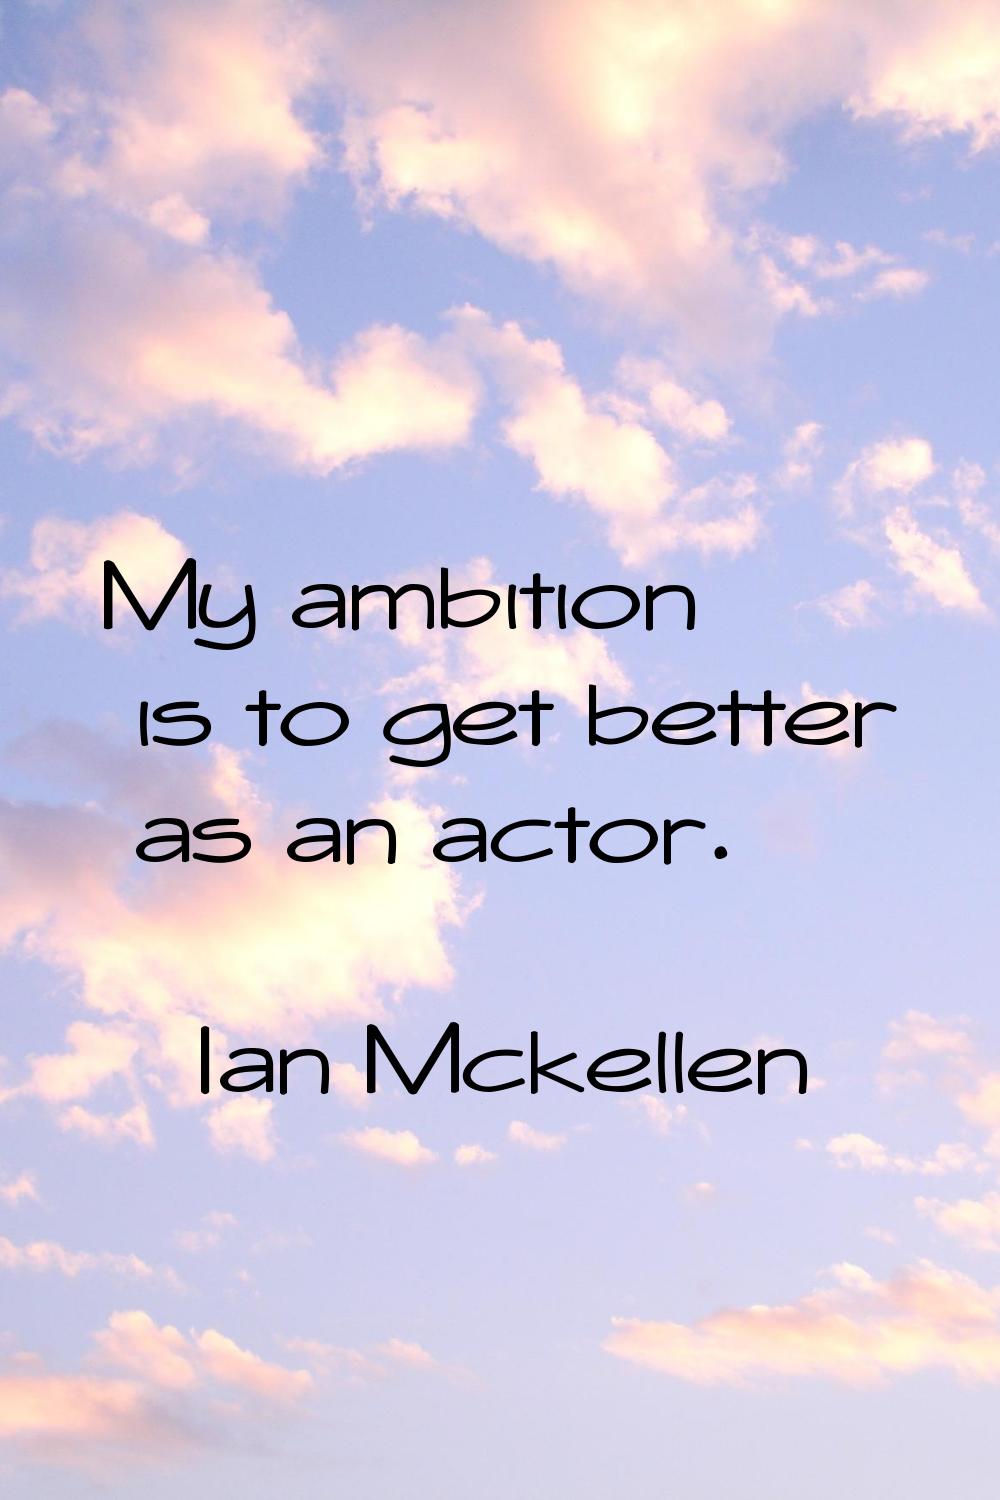 My ambition is to get better as an actor.